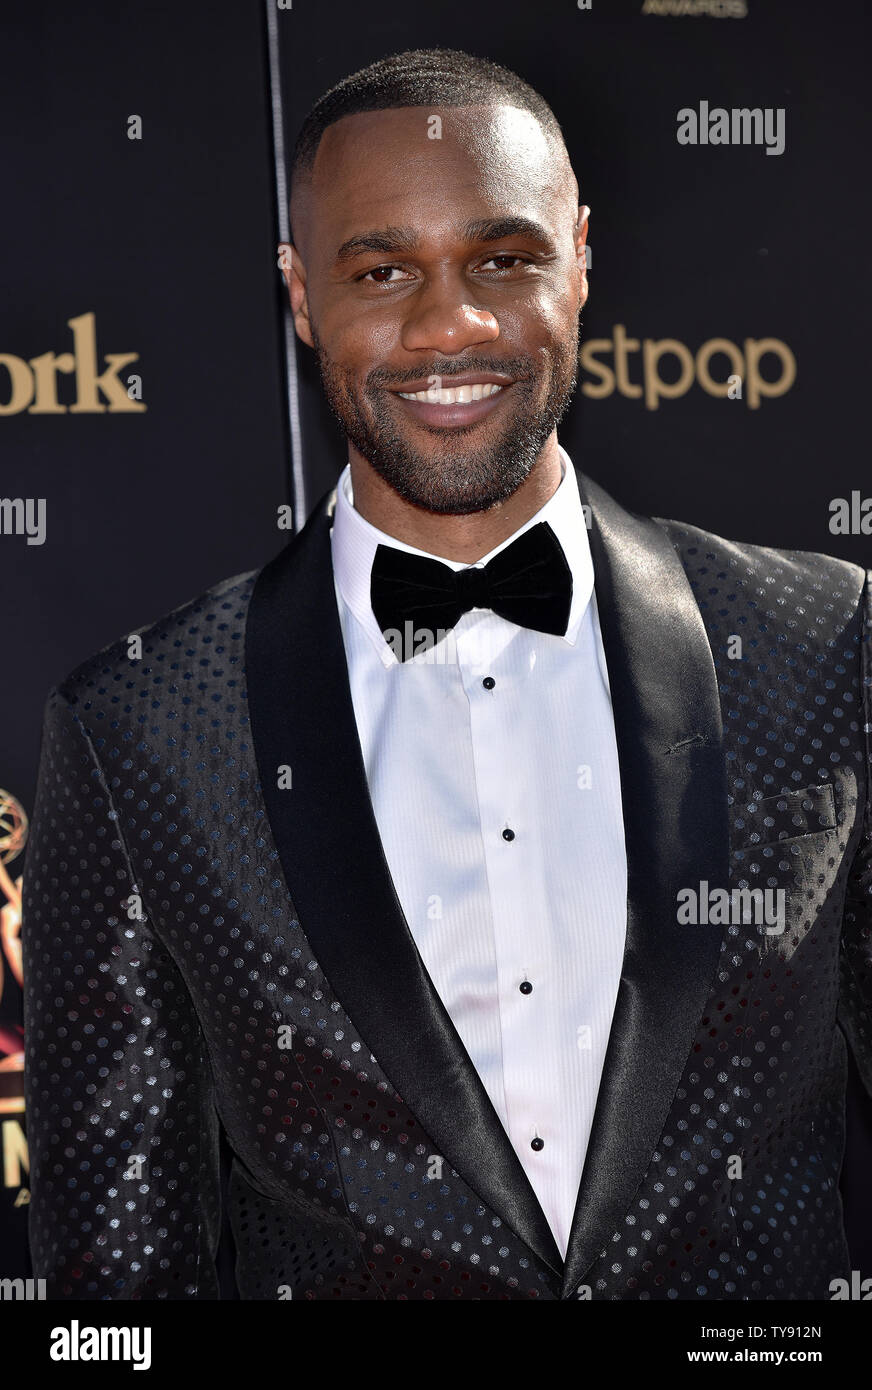 James Bland arrives on the red carpet for the 46th Annual Daytime Creative Arts Emmy Awards at the Pasadena Civic Auditorium in Pasadena, California on May 3, 2019. Photo by Chris Chew/UPI Stock Photo